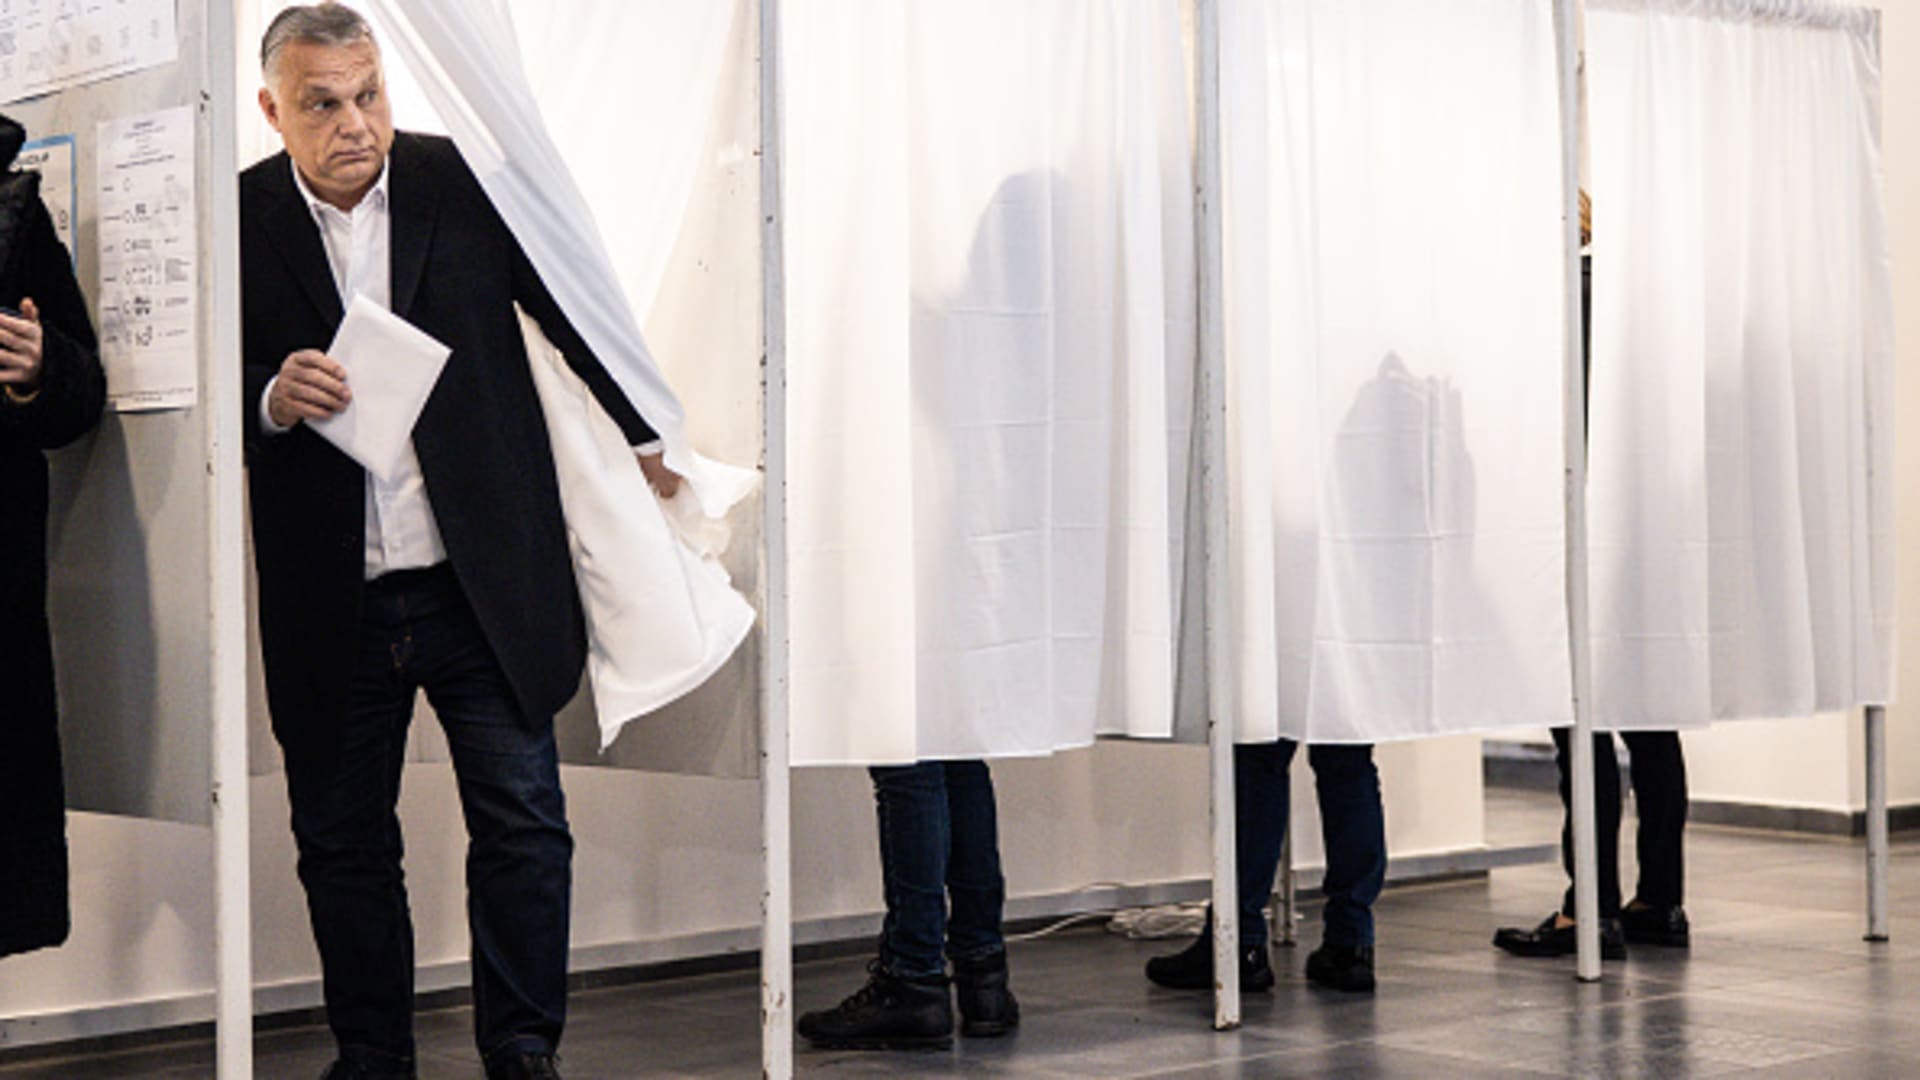 Viktor Orban, Hungary's prime minister, leaves a booth after marking his ballot at a polling station in Budapest, Hungary, on Sunday, April 3, 2022.